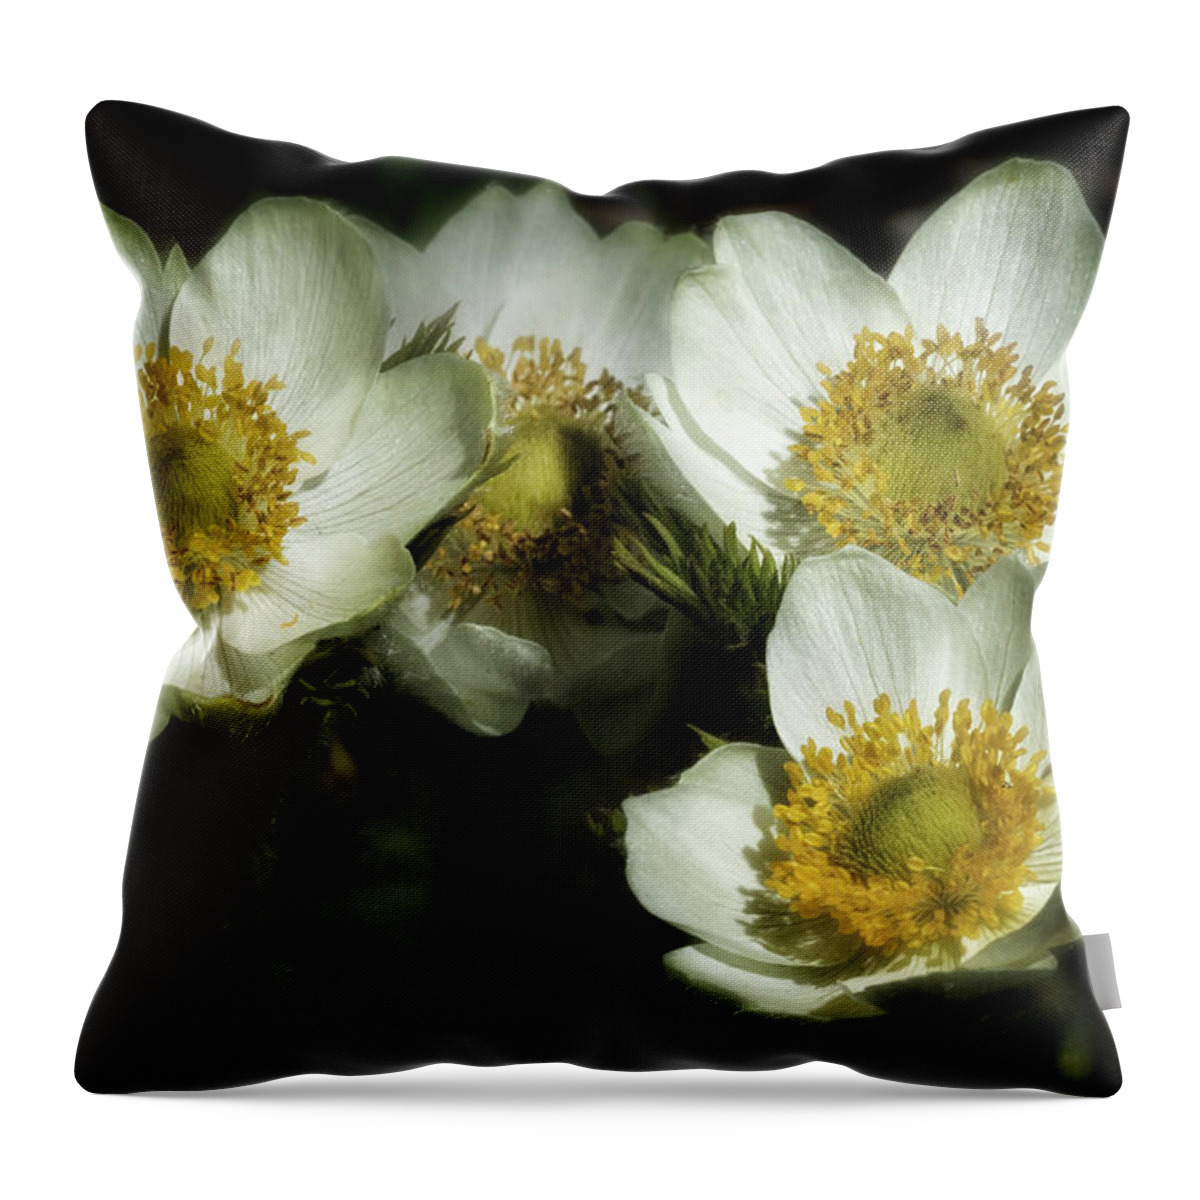 Pasqueflower Throw Pillow featuring the photograph Pasqueflowers by Belinda Greb